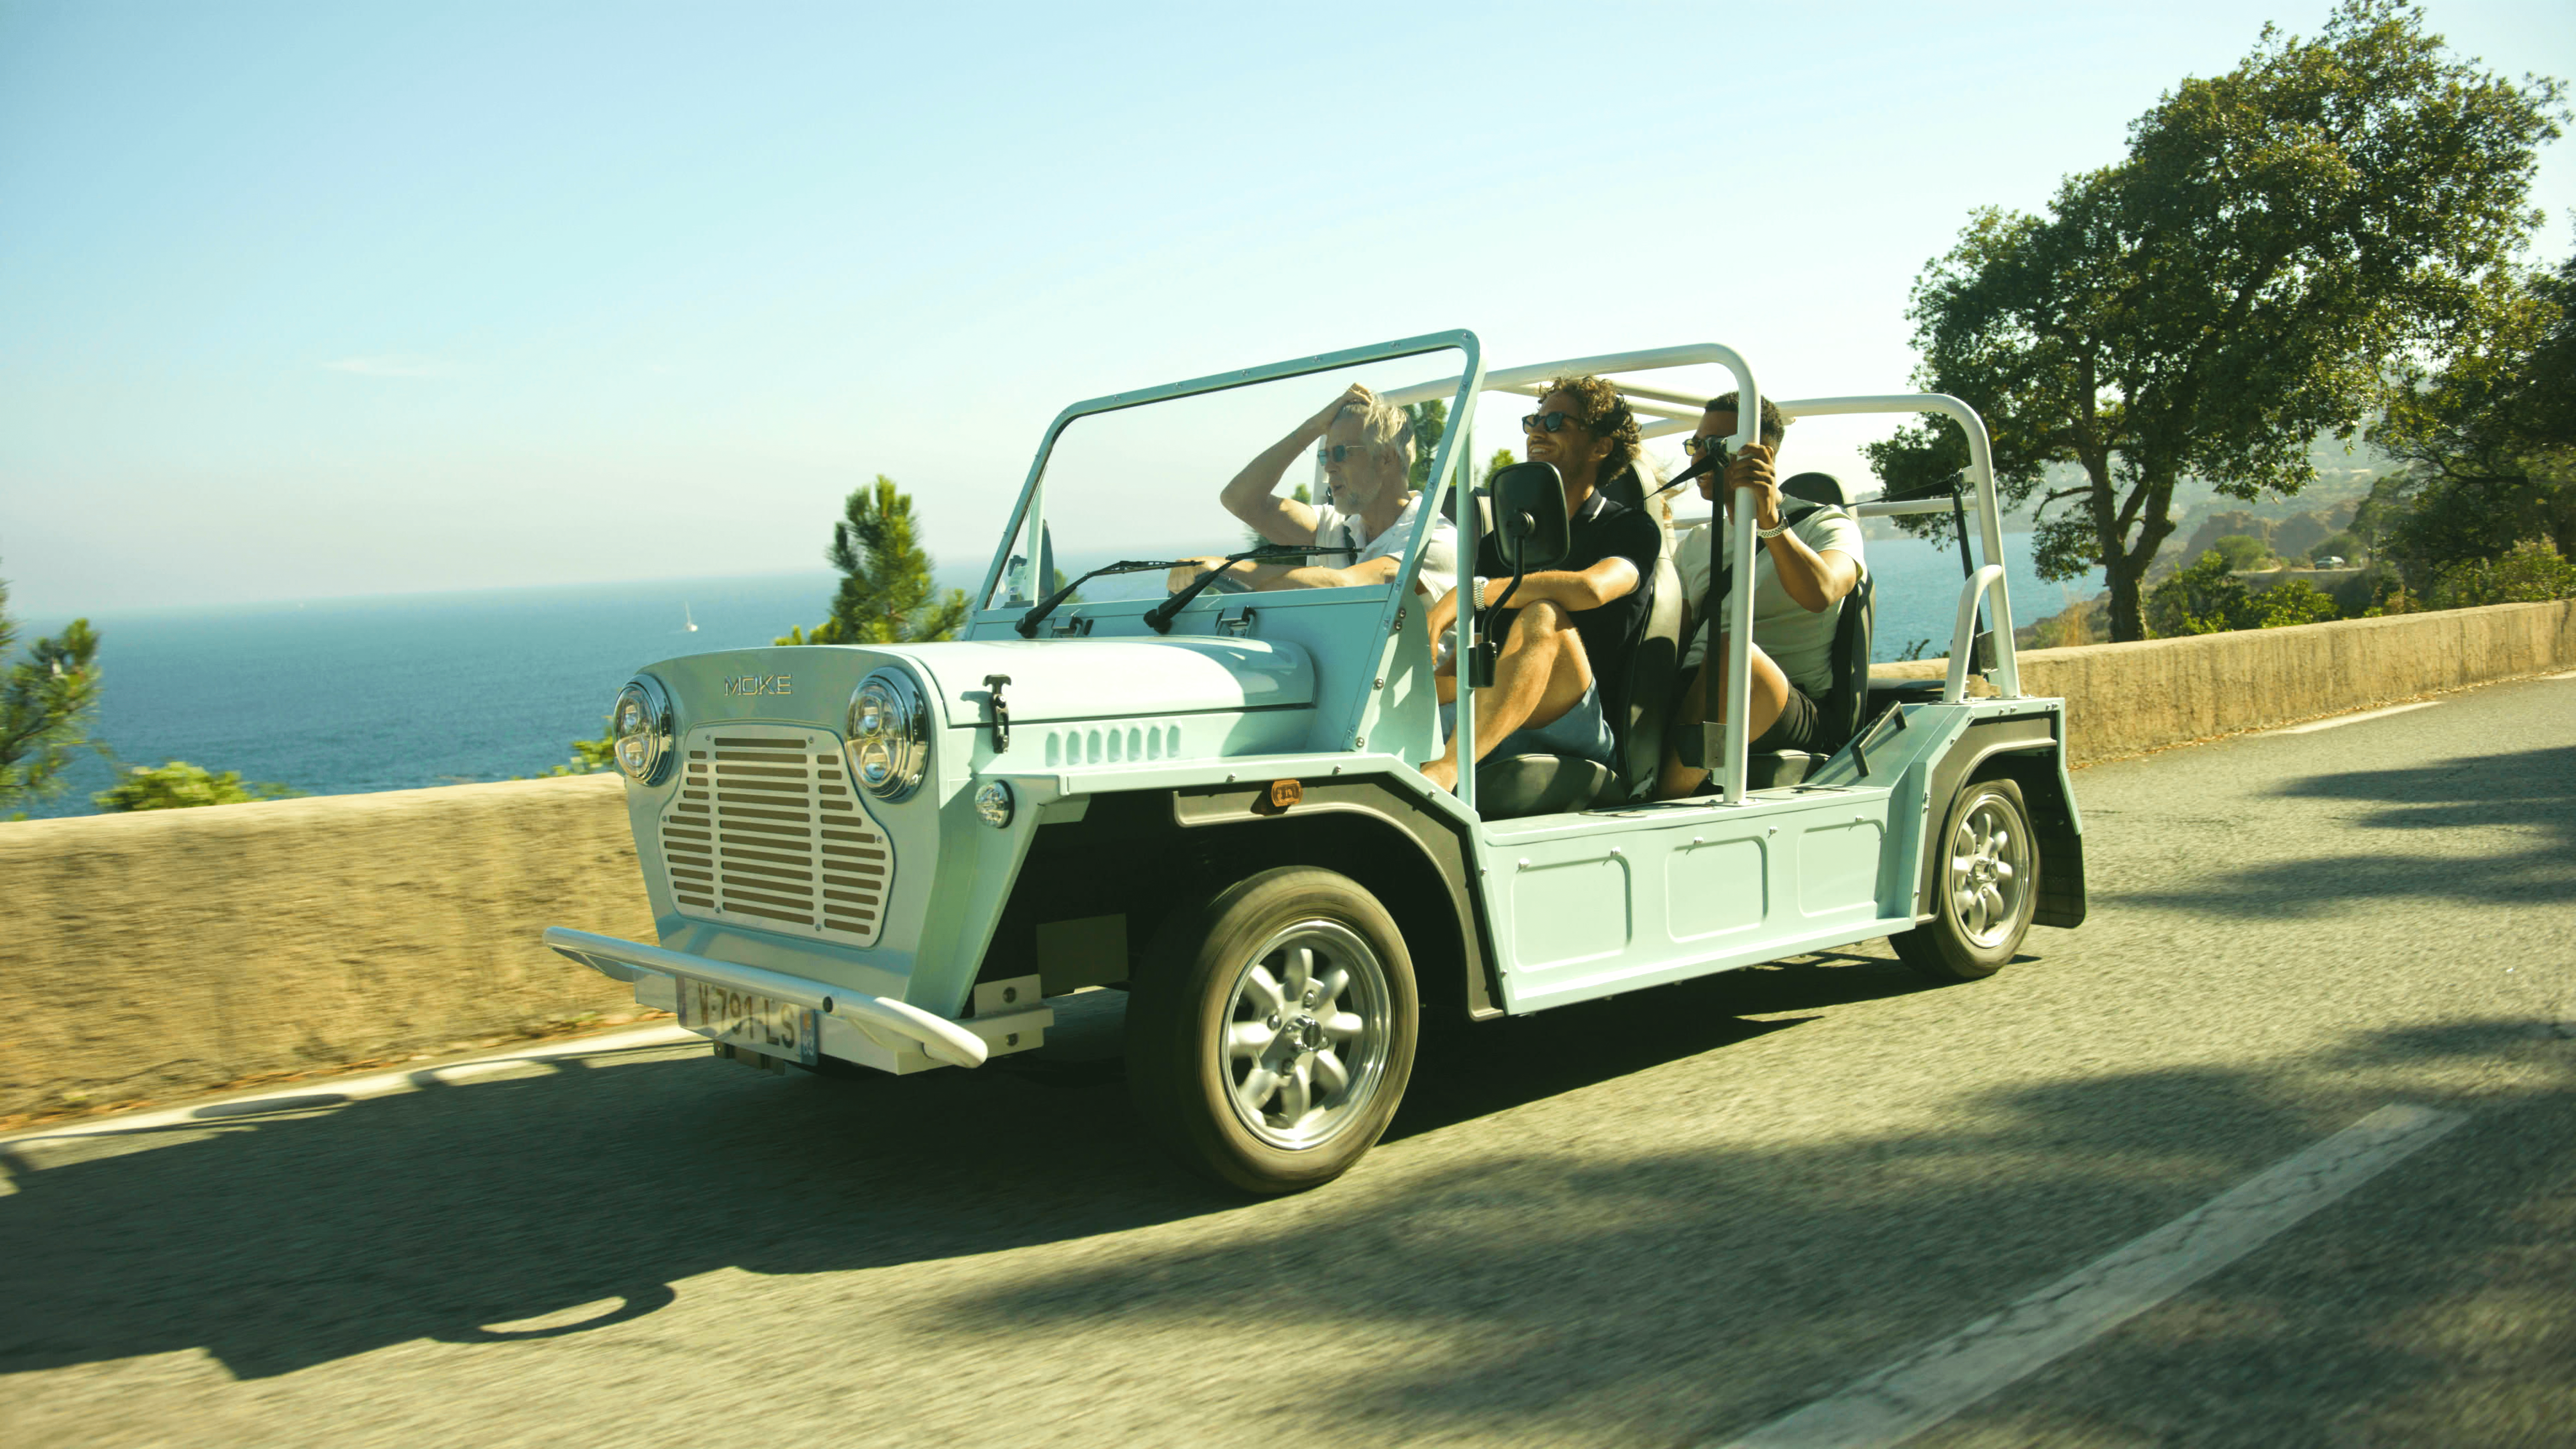 Group of friends enjoying a road trip in a Moke vehicle with the sea in the background on a sunny day.